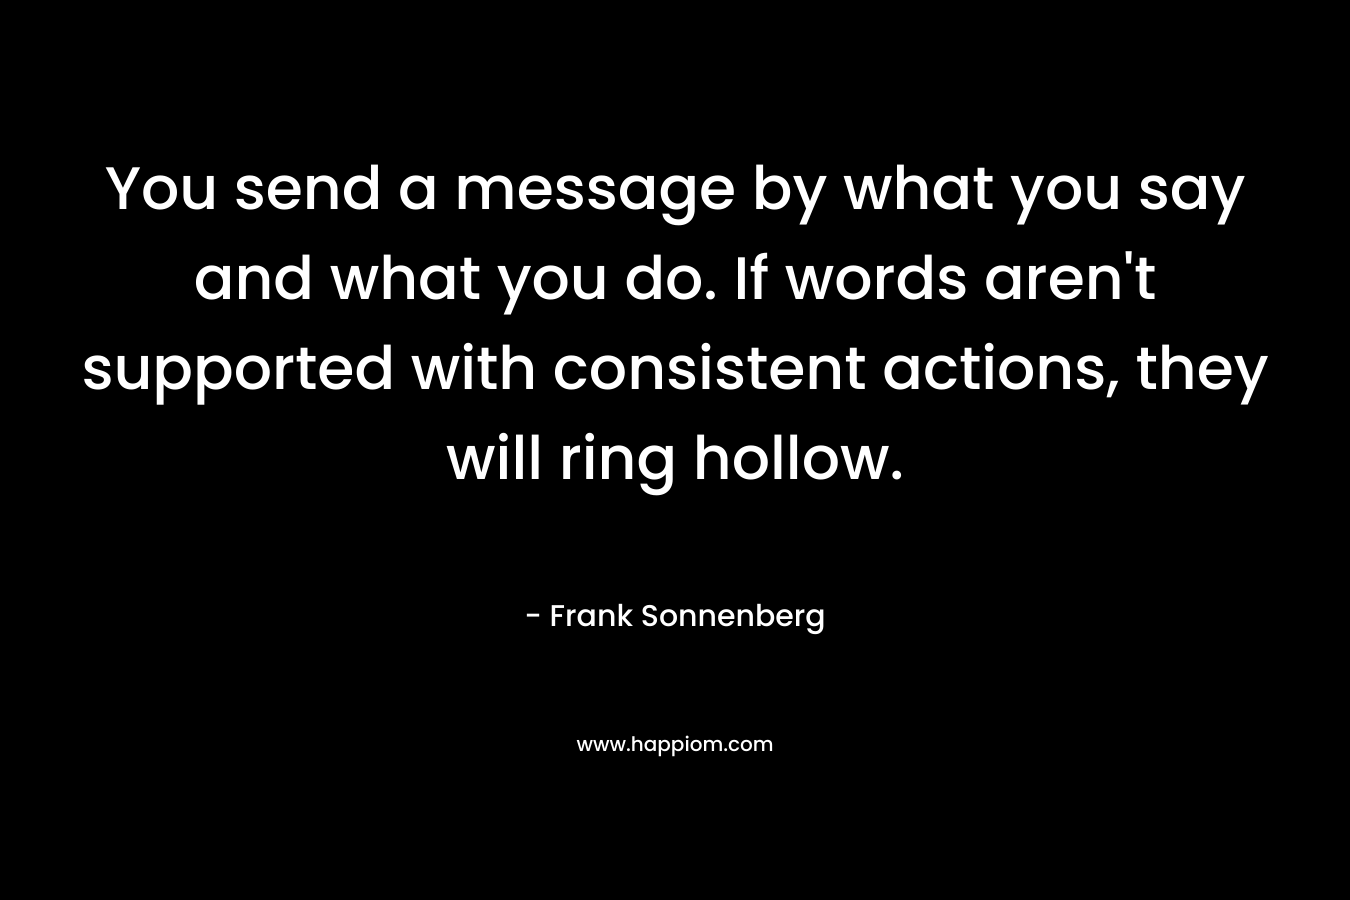 You send a message by what you say and what you do. If words aren't supported with consistent actions, they will ring hollow.